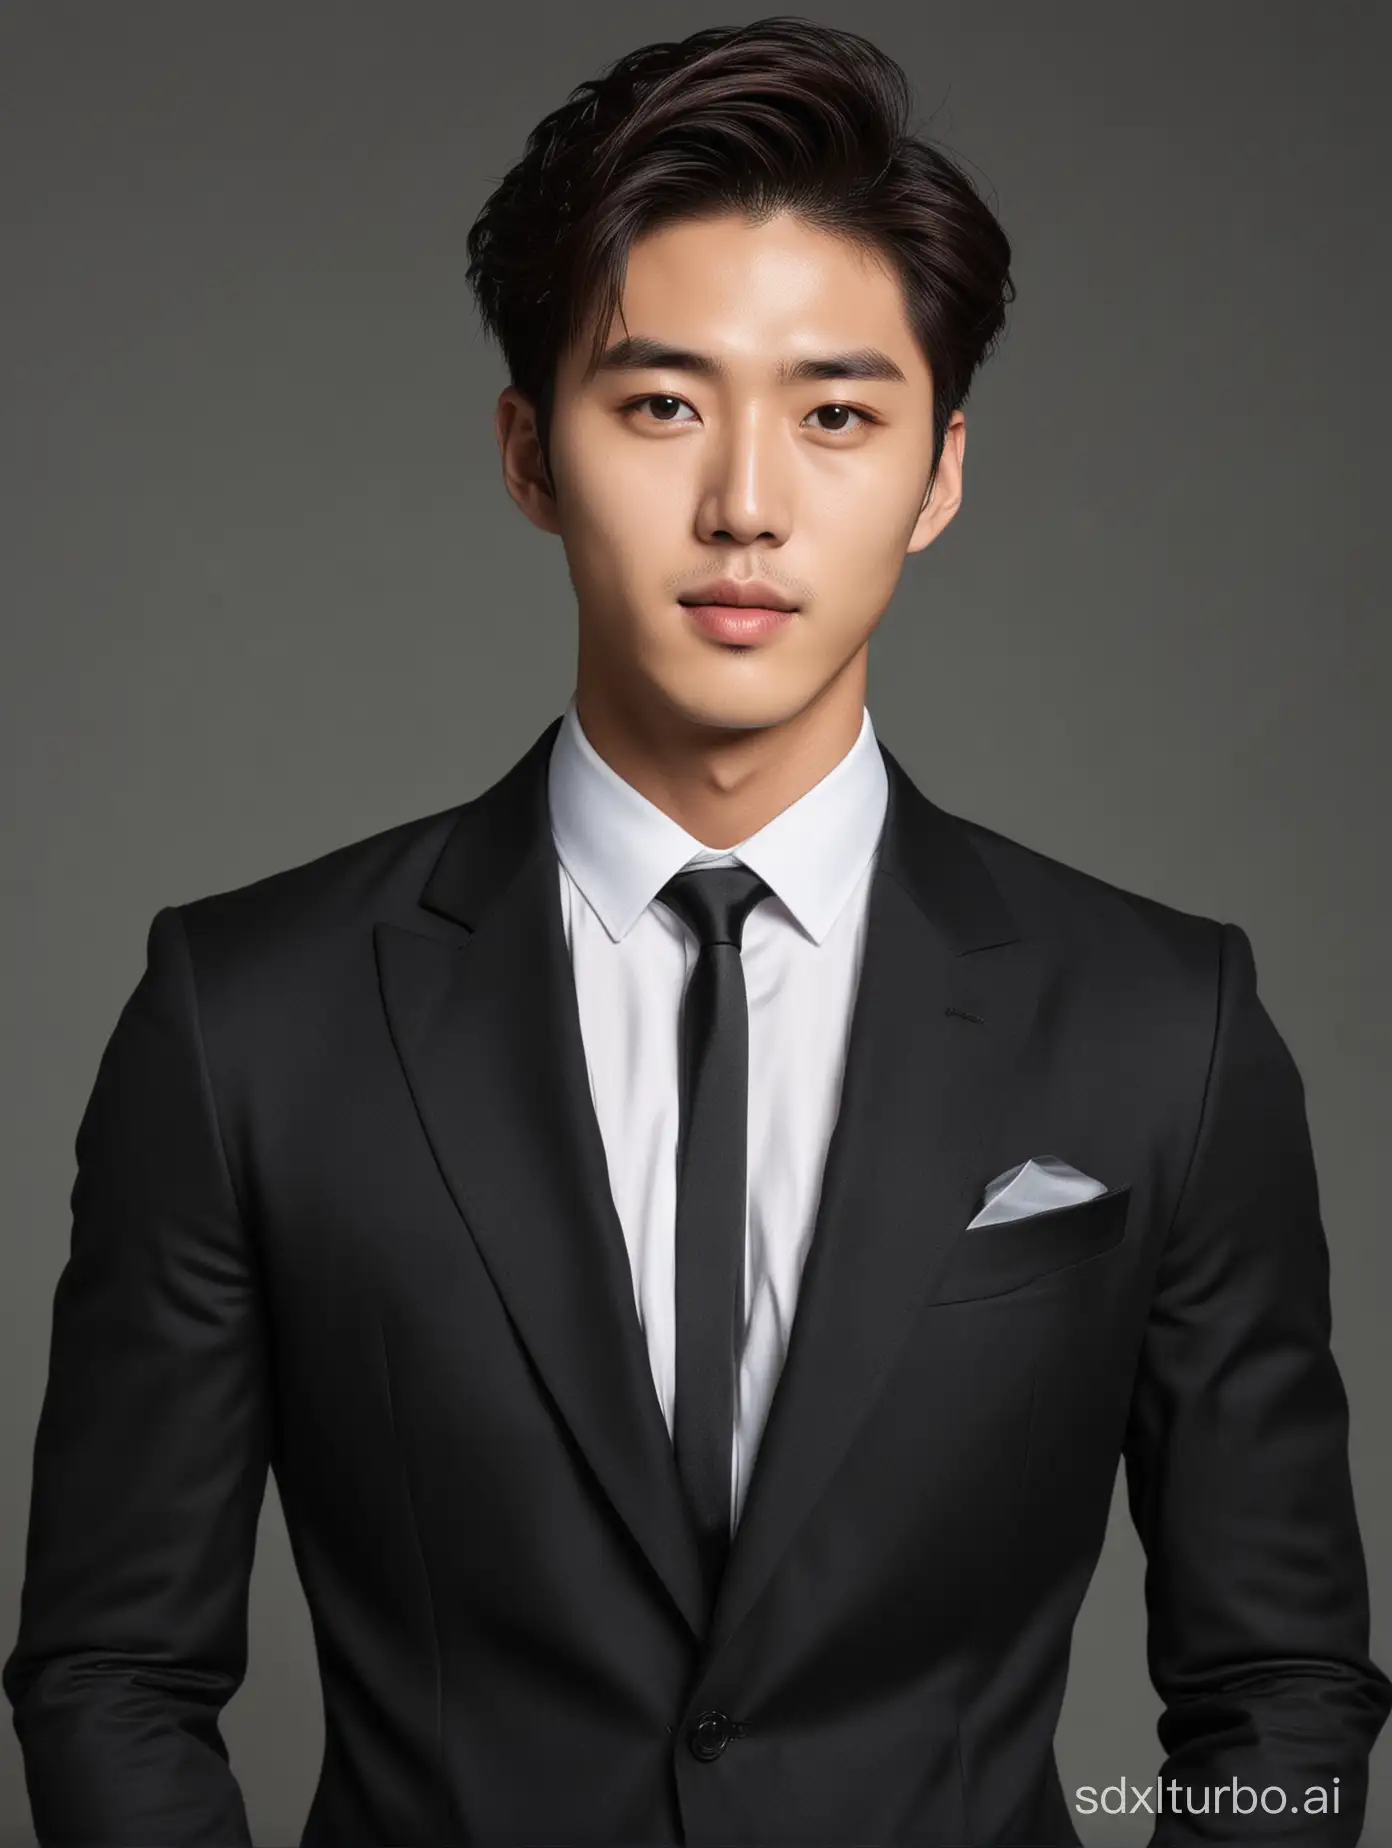 A handsome Korean man is wearing a black suit